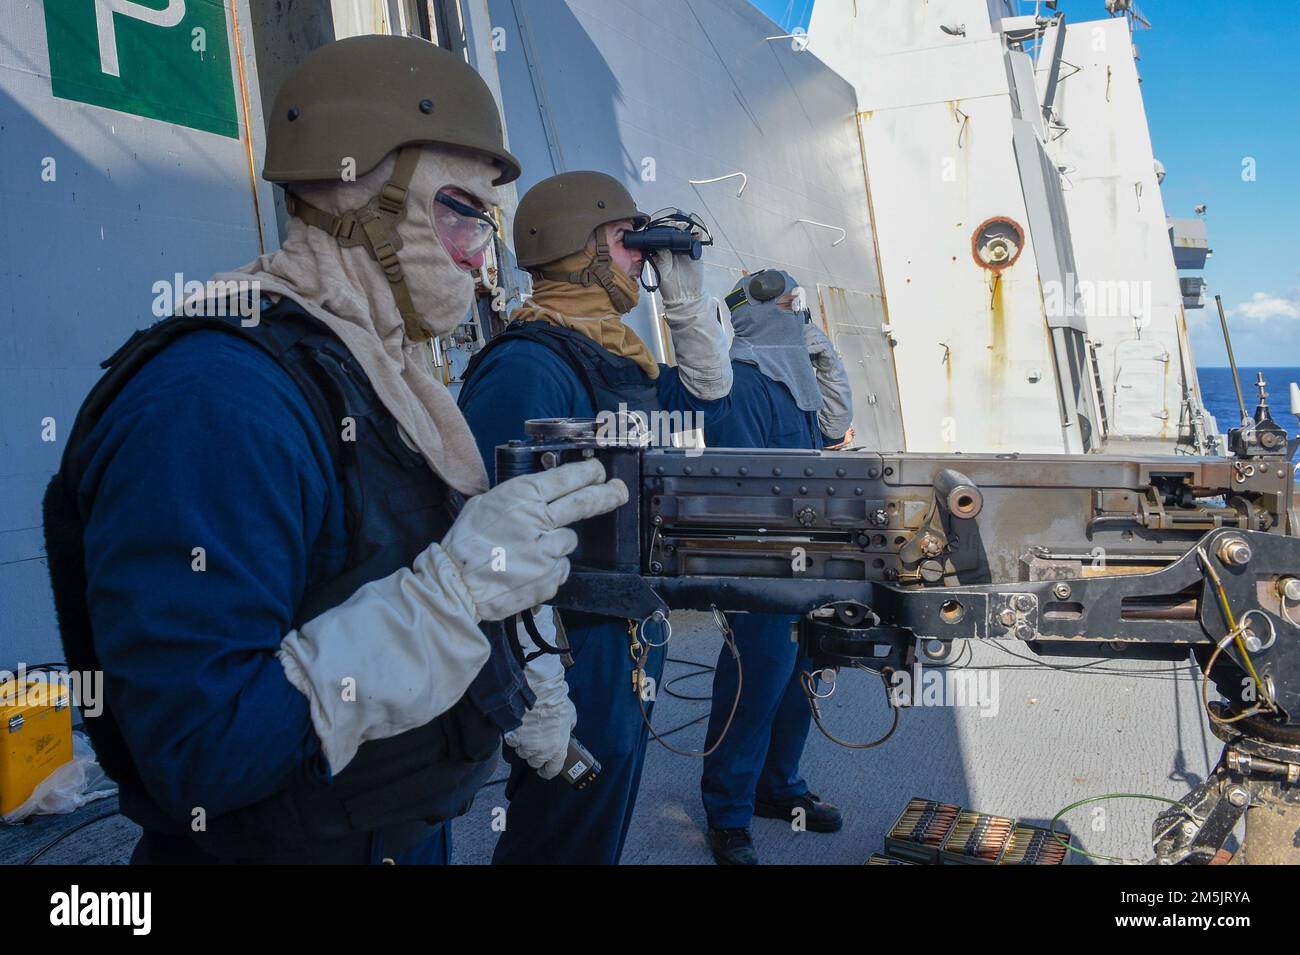 PHILIPPINE SEA (March 20, 2022) Sailors assigned to the amphibious transport dock ship USS Green Bay (LPD 20) conduct a live fire exercise during surface warfare advanced tactics training. Green Bay, part of Expeditionary Strike Group 7, along with the 31st Marine Expeditionary Unit (MEU), is operating in the U.S. 7th Fleet area of responsibility to enhance interoperability with allies and partners and serve as a ready response force to defend peace and stability in the Indo-Pacific region. Stock Photo